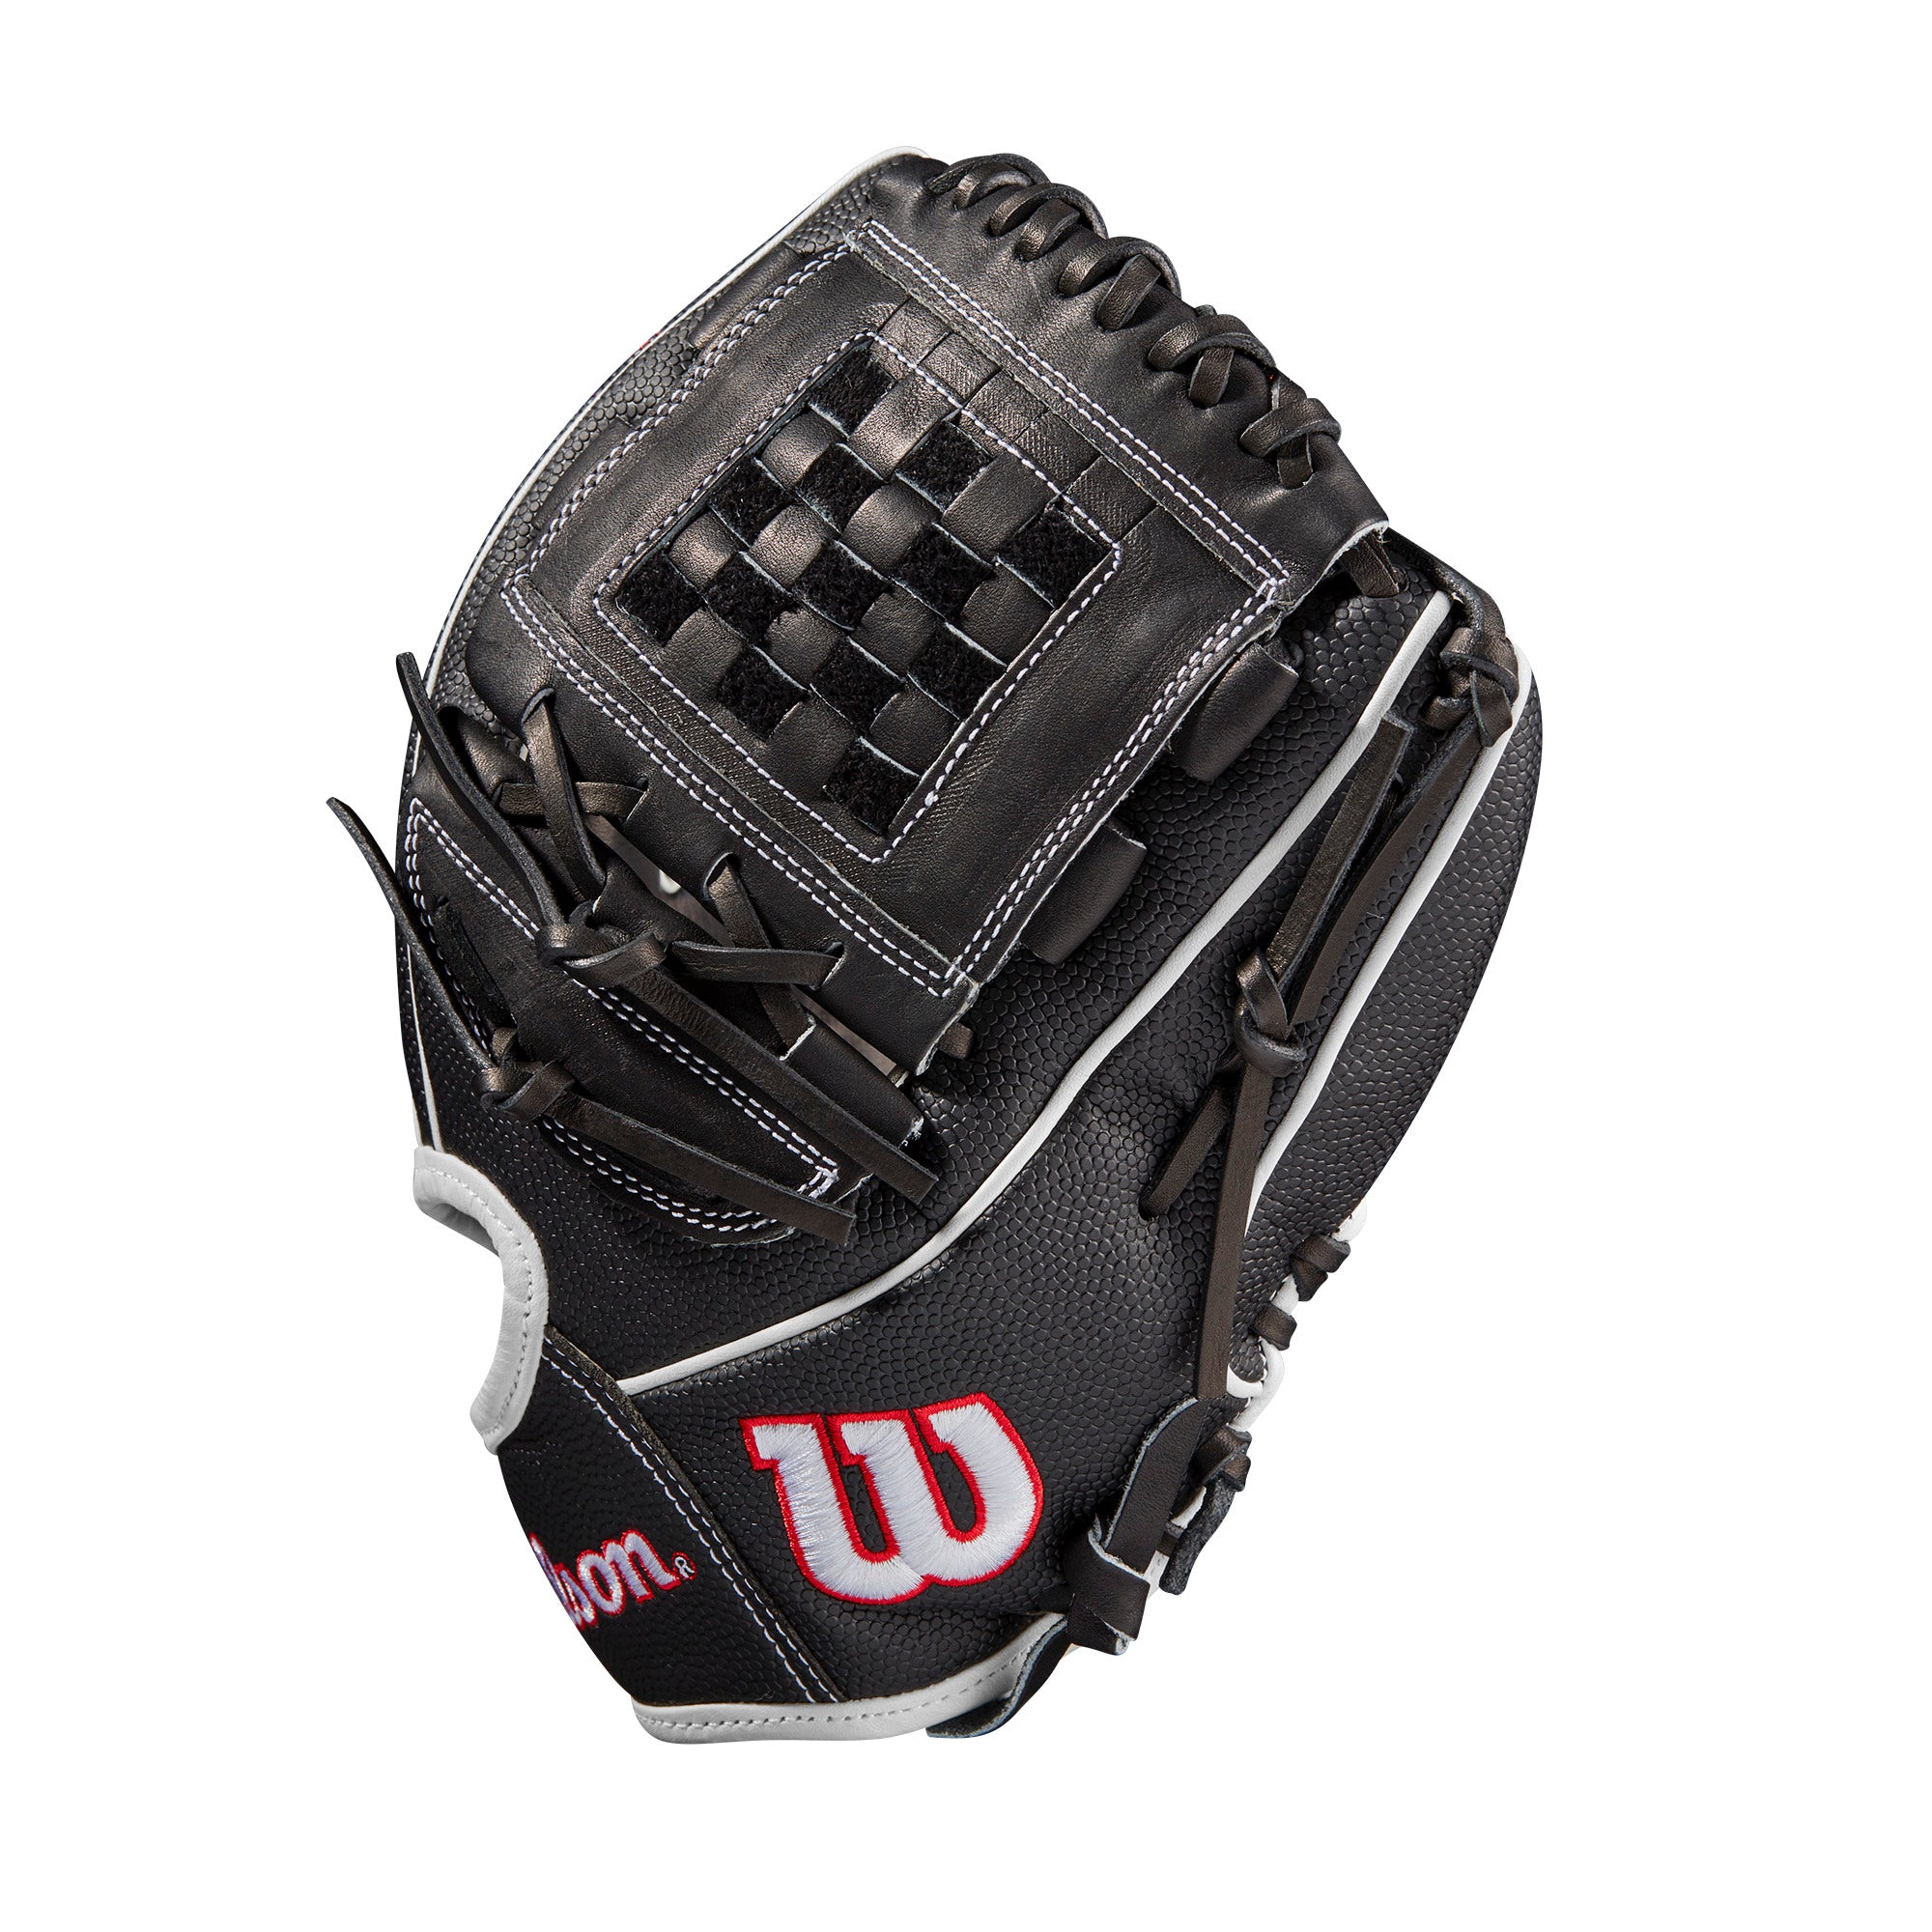 Wilson A2000 P12SS Fastpitch 12-inch